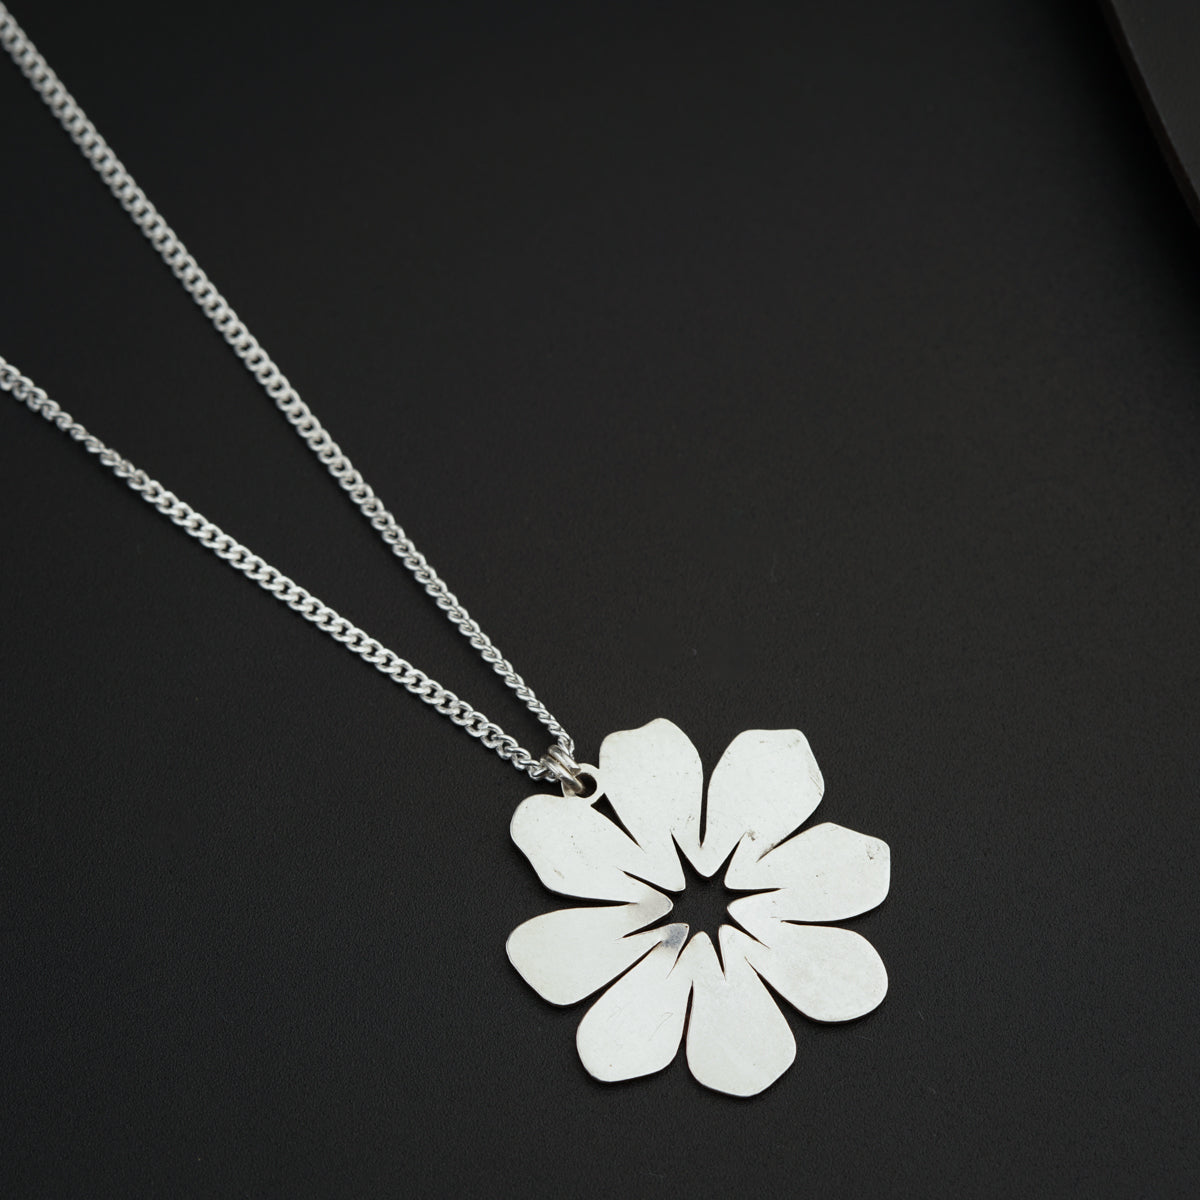 Cosmos Flower Necklace